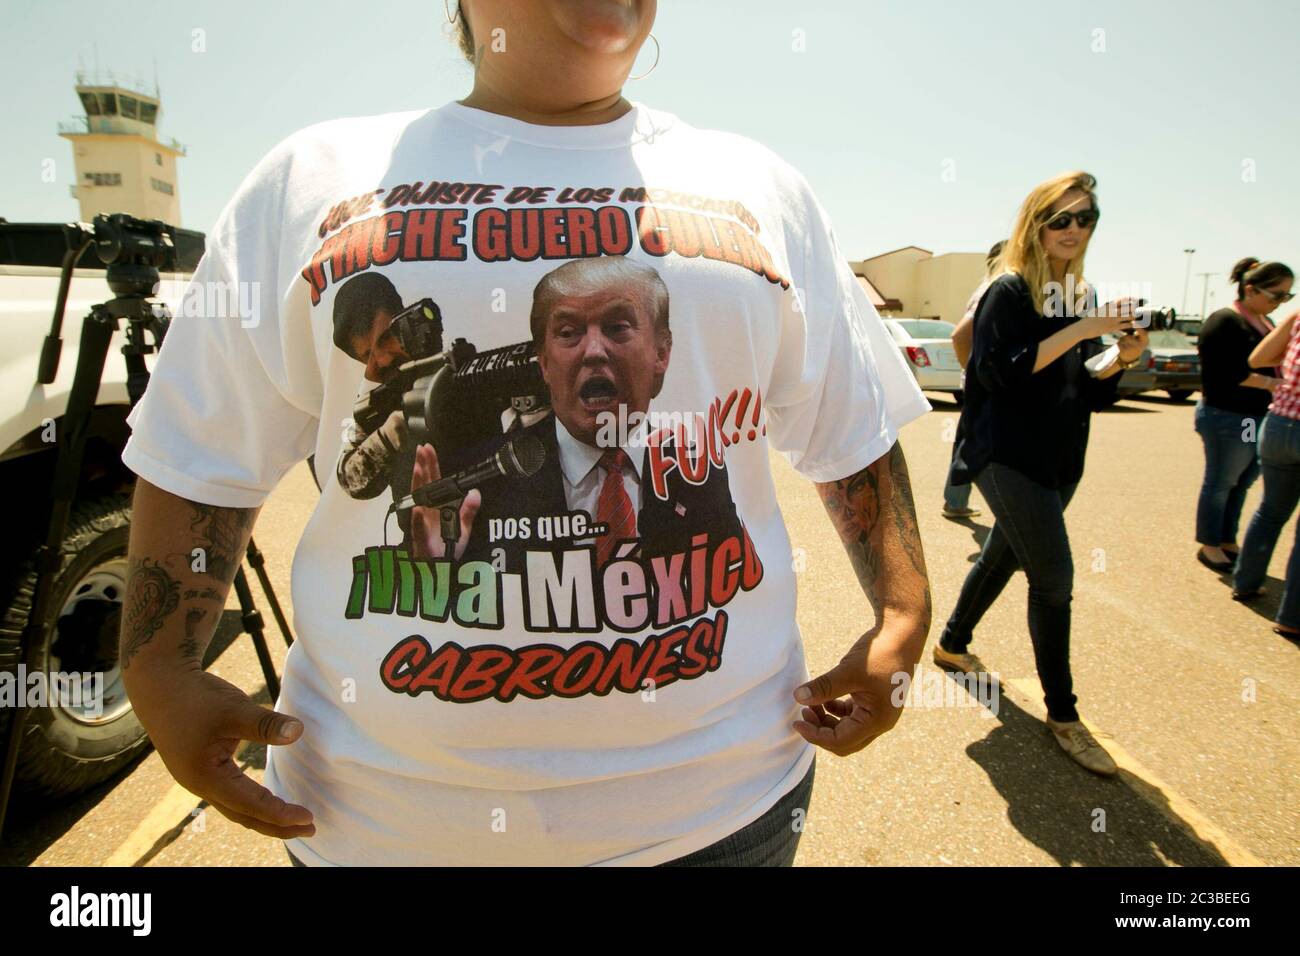 Laredo Texas USA, July 23rd, 2015: Donald Trump in Laredo - Woman  in a group protesting the arrival of Republican presidential nominee hopeful Donald Trump wears a t-shirt that includes insults to Trump and images of Mexican drug trafficker El Chapo Guzman. Trump, who has been critical of Mexican immigrants and U.S. immigration control, traveled to the town on the U.S.-Mexico border for a campaign event.  ©Marjorie Kamys Cotera/Daemmrich Photography Stock Photo